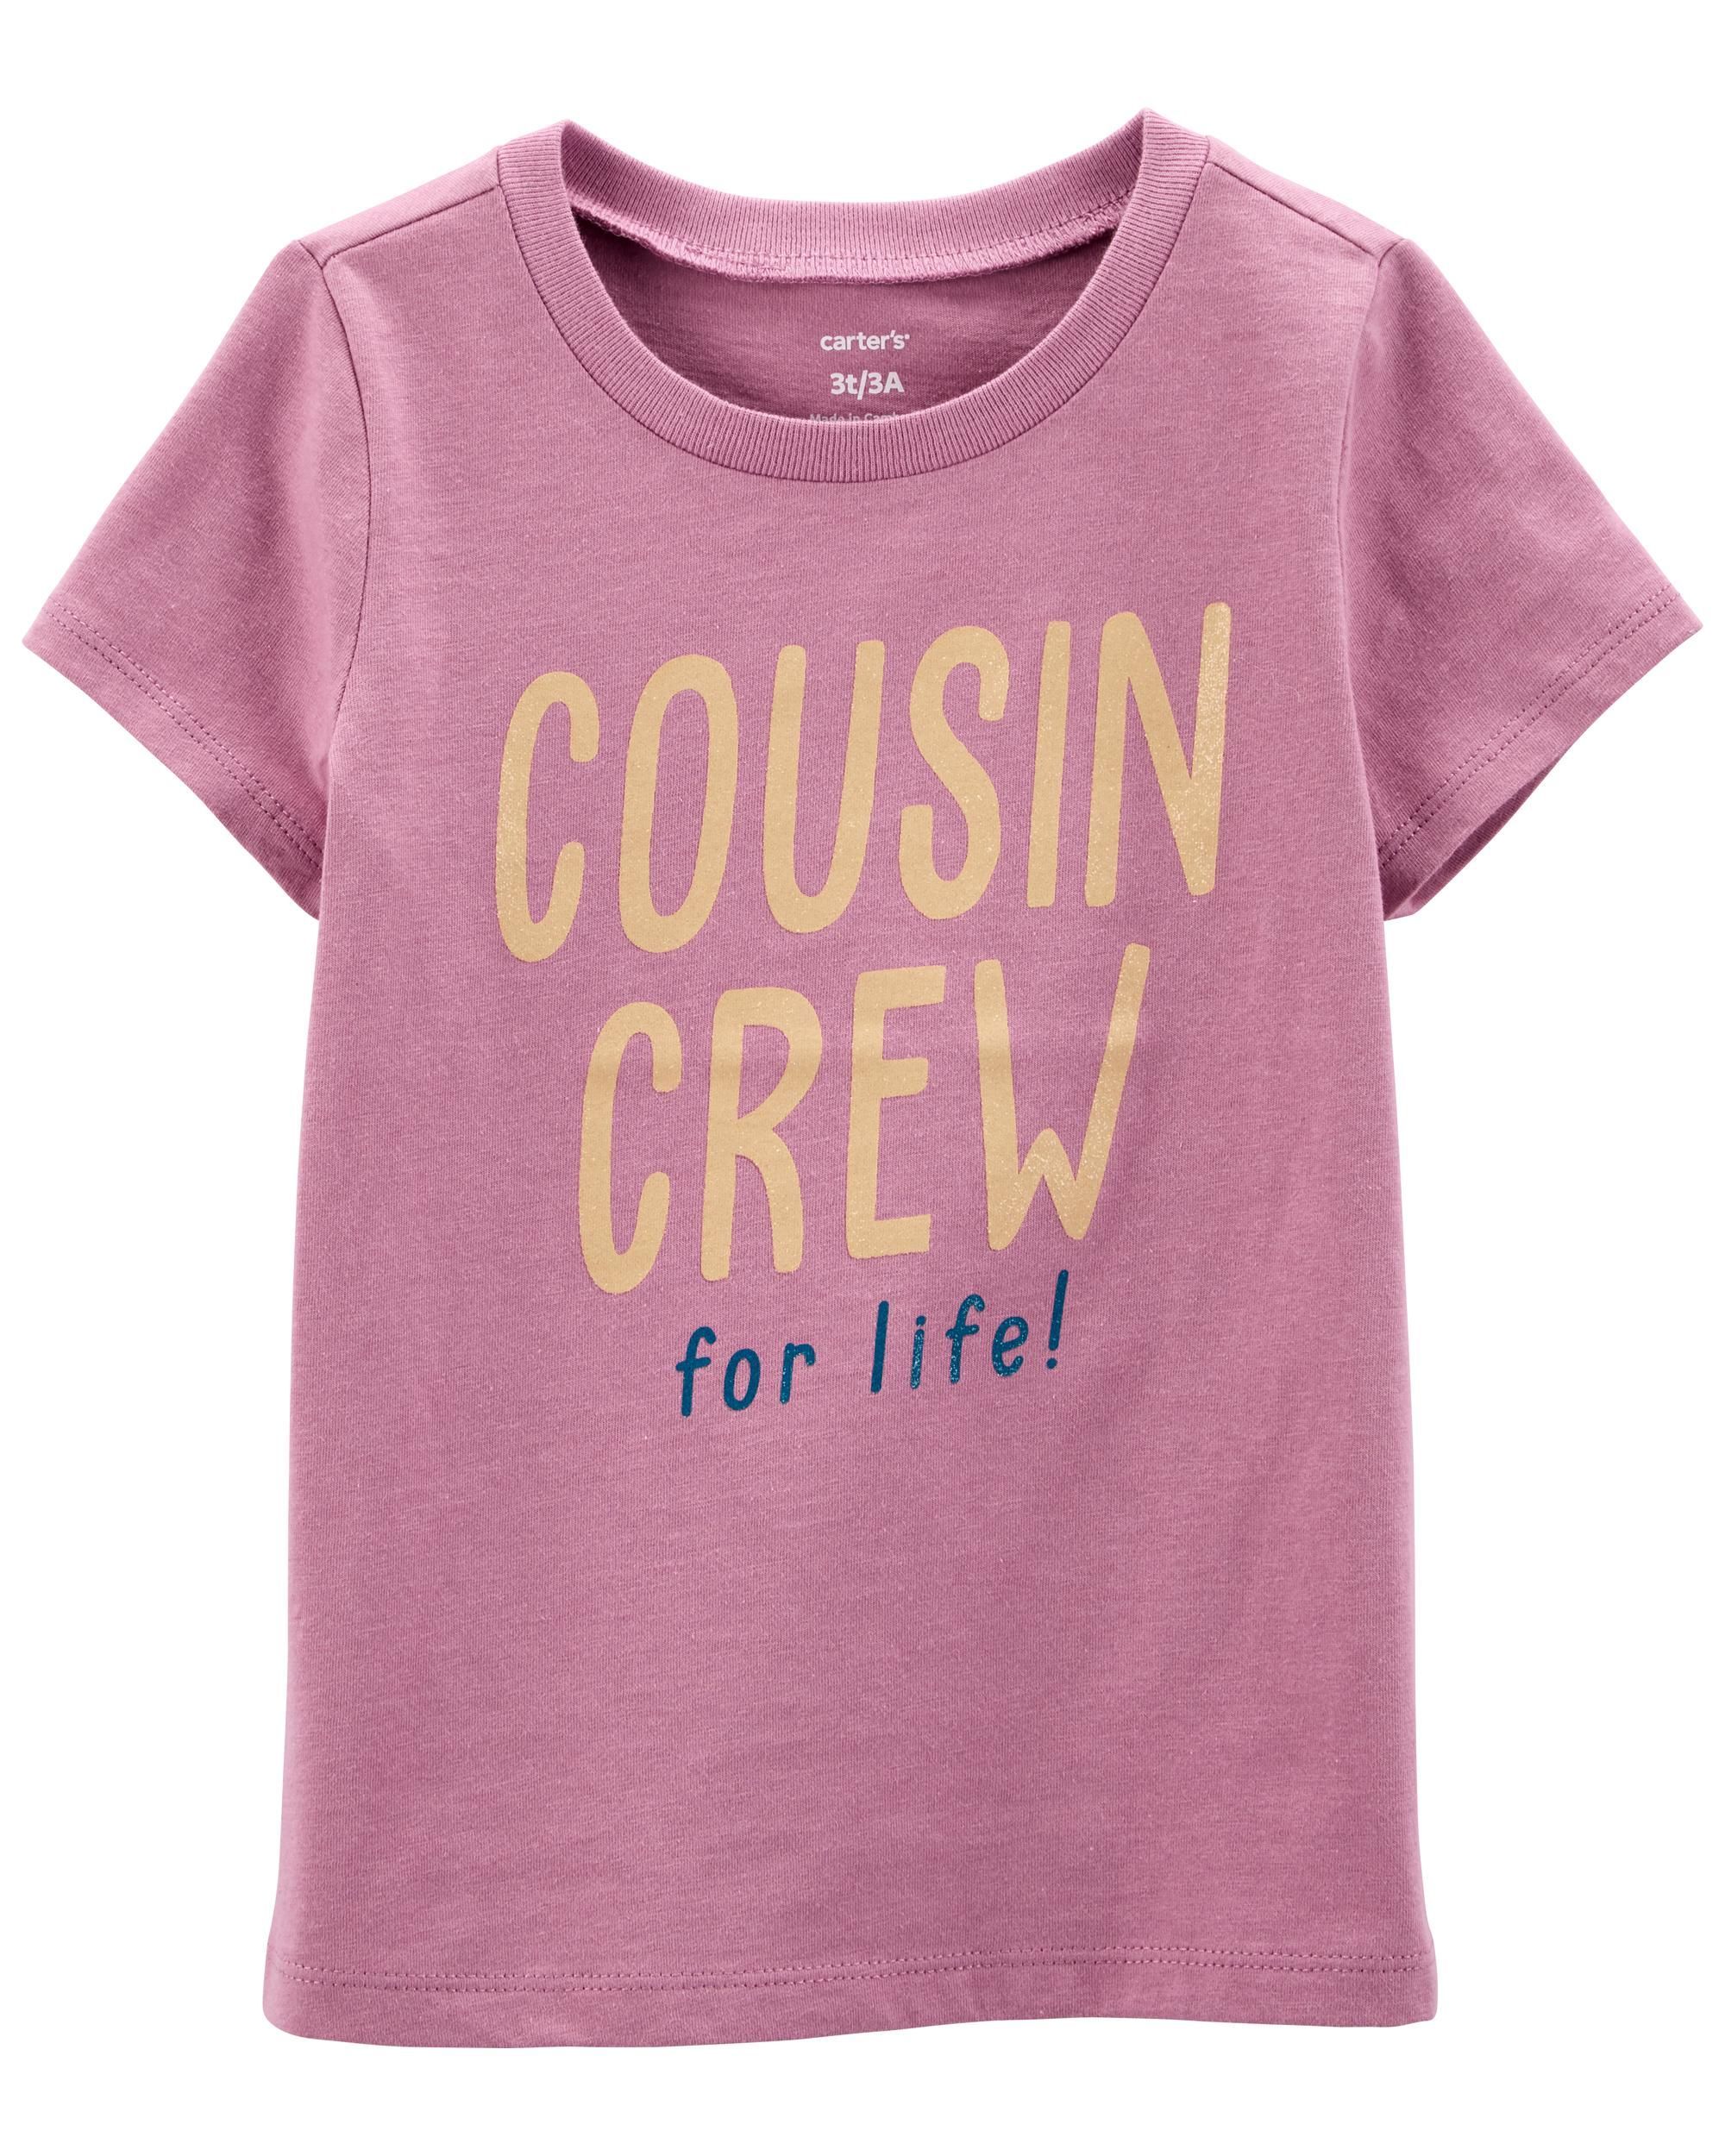 Cousin Crew For Life Jersey Tee | Carter's